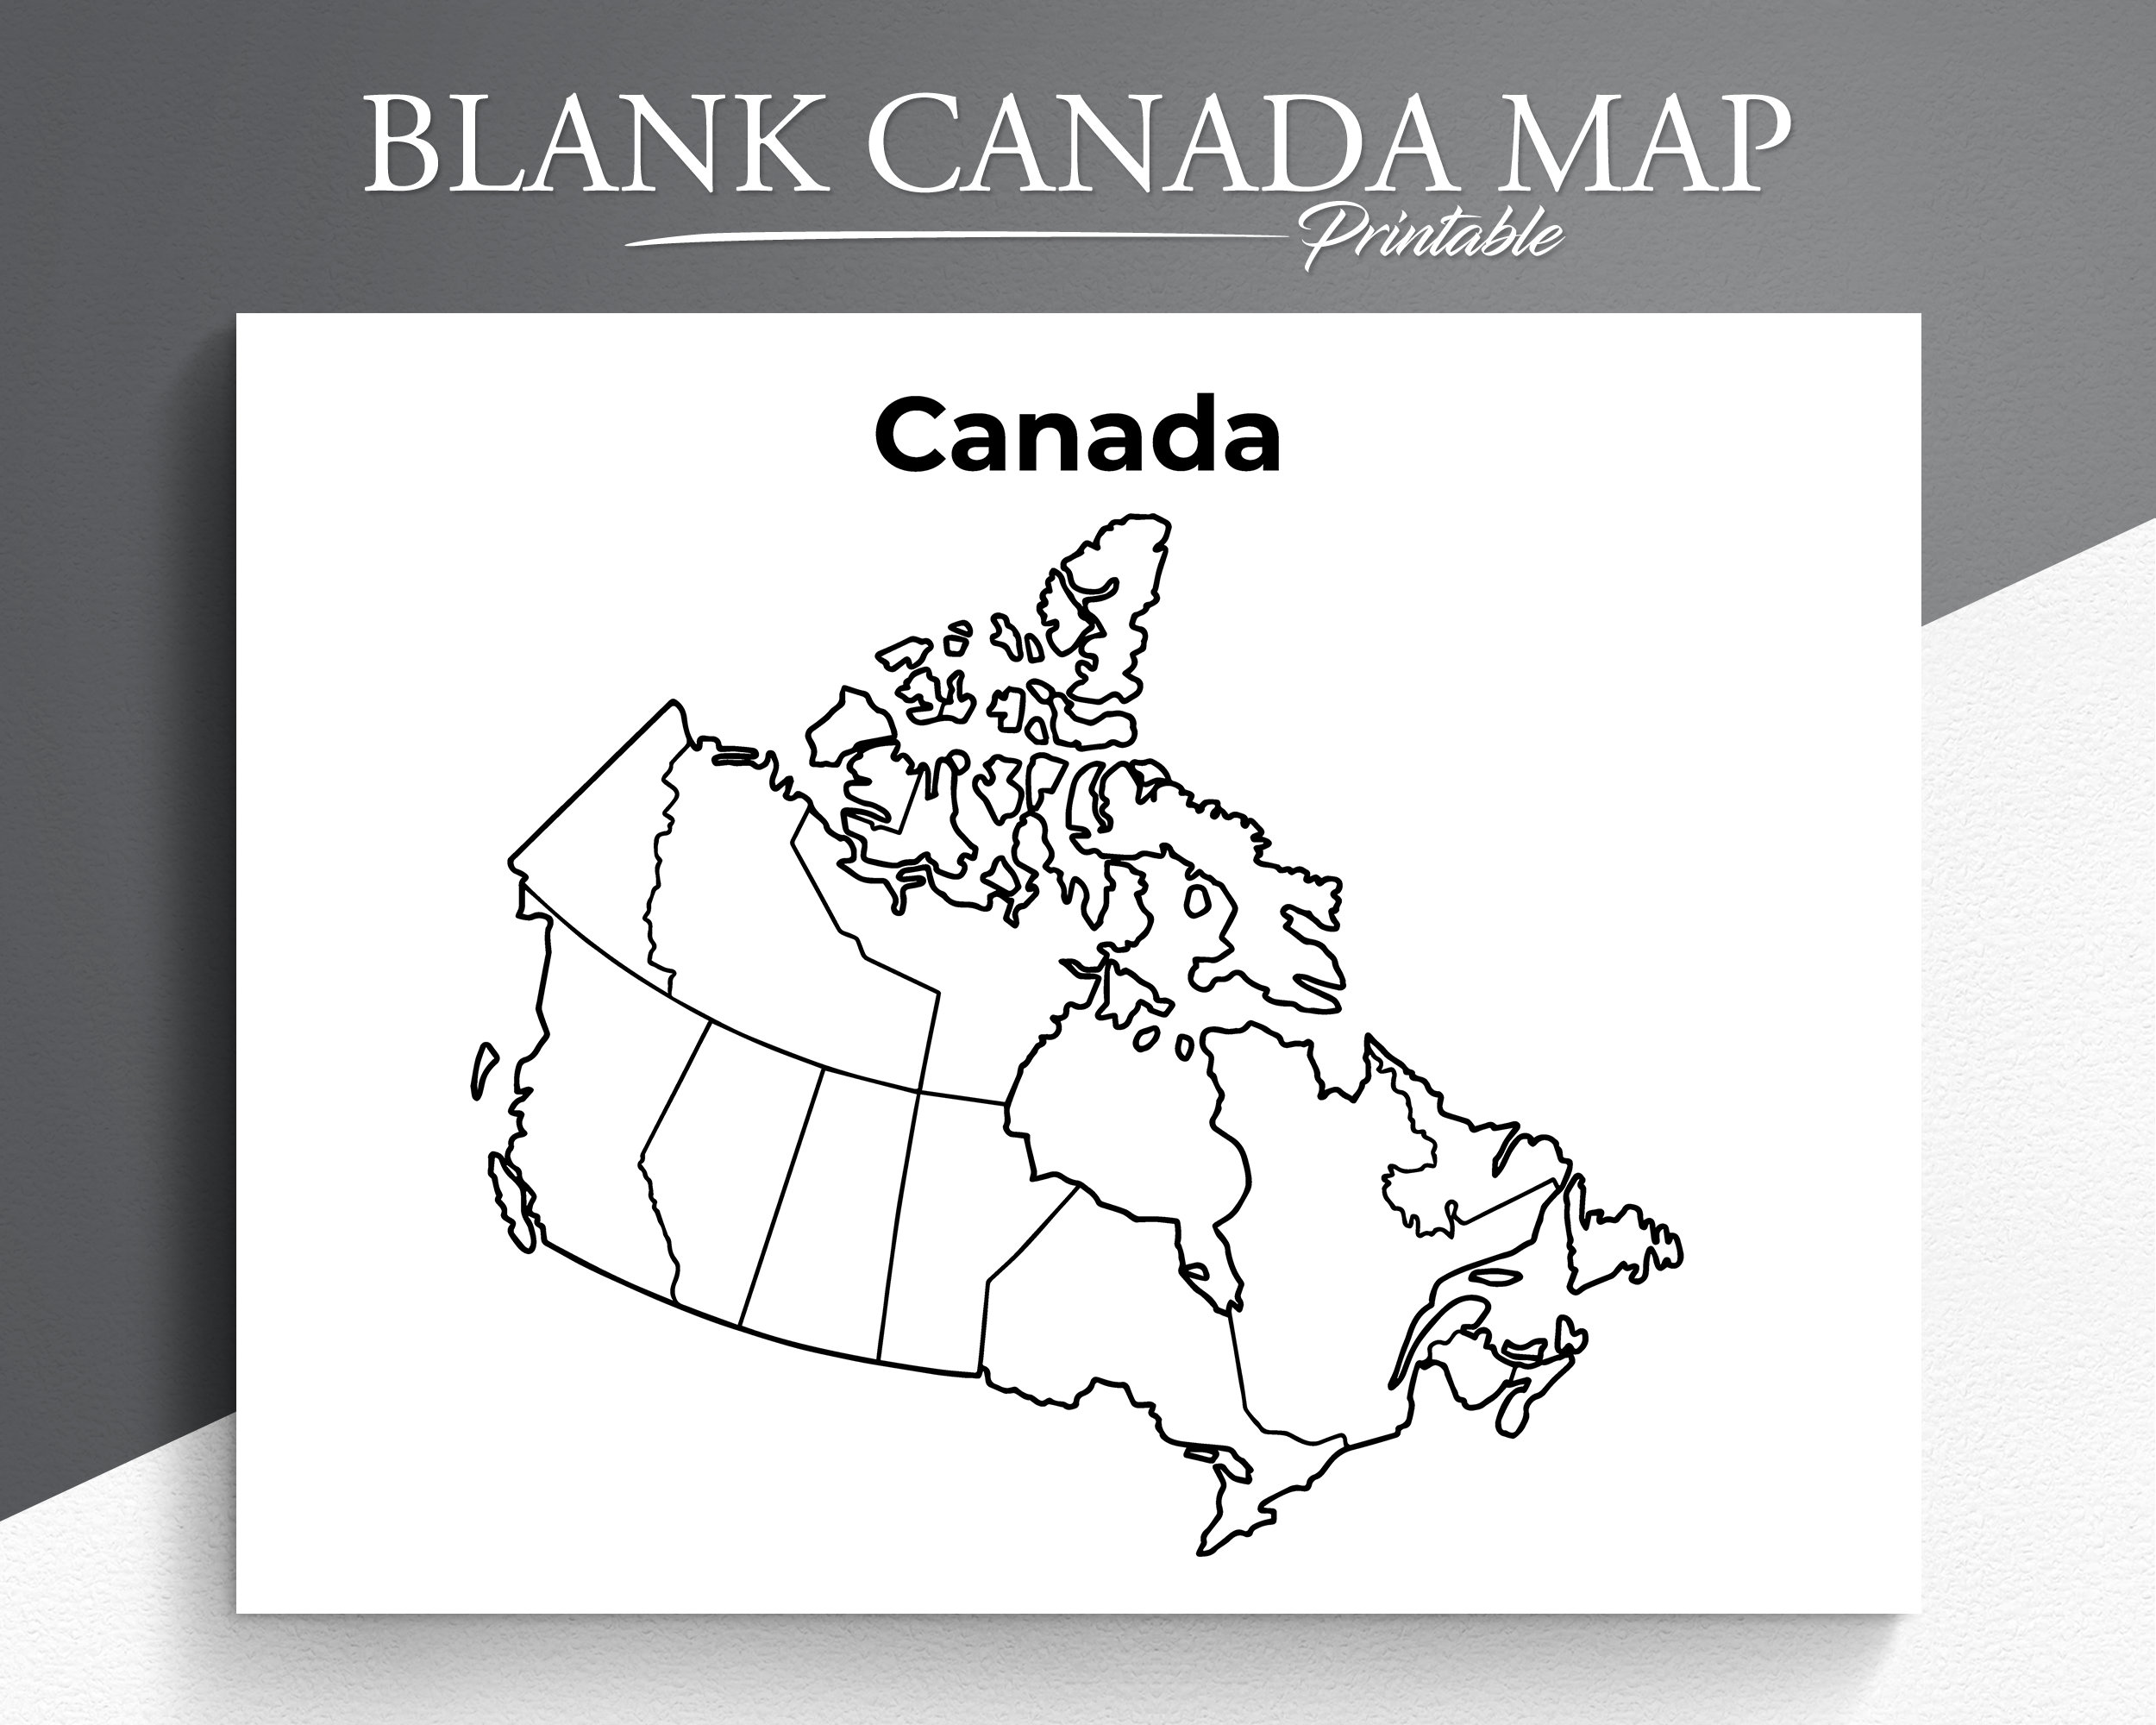 Printable blank canada map educational map for kids canada coloring page canada map coloring canadian map coloring page